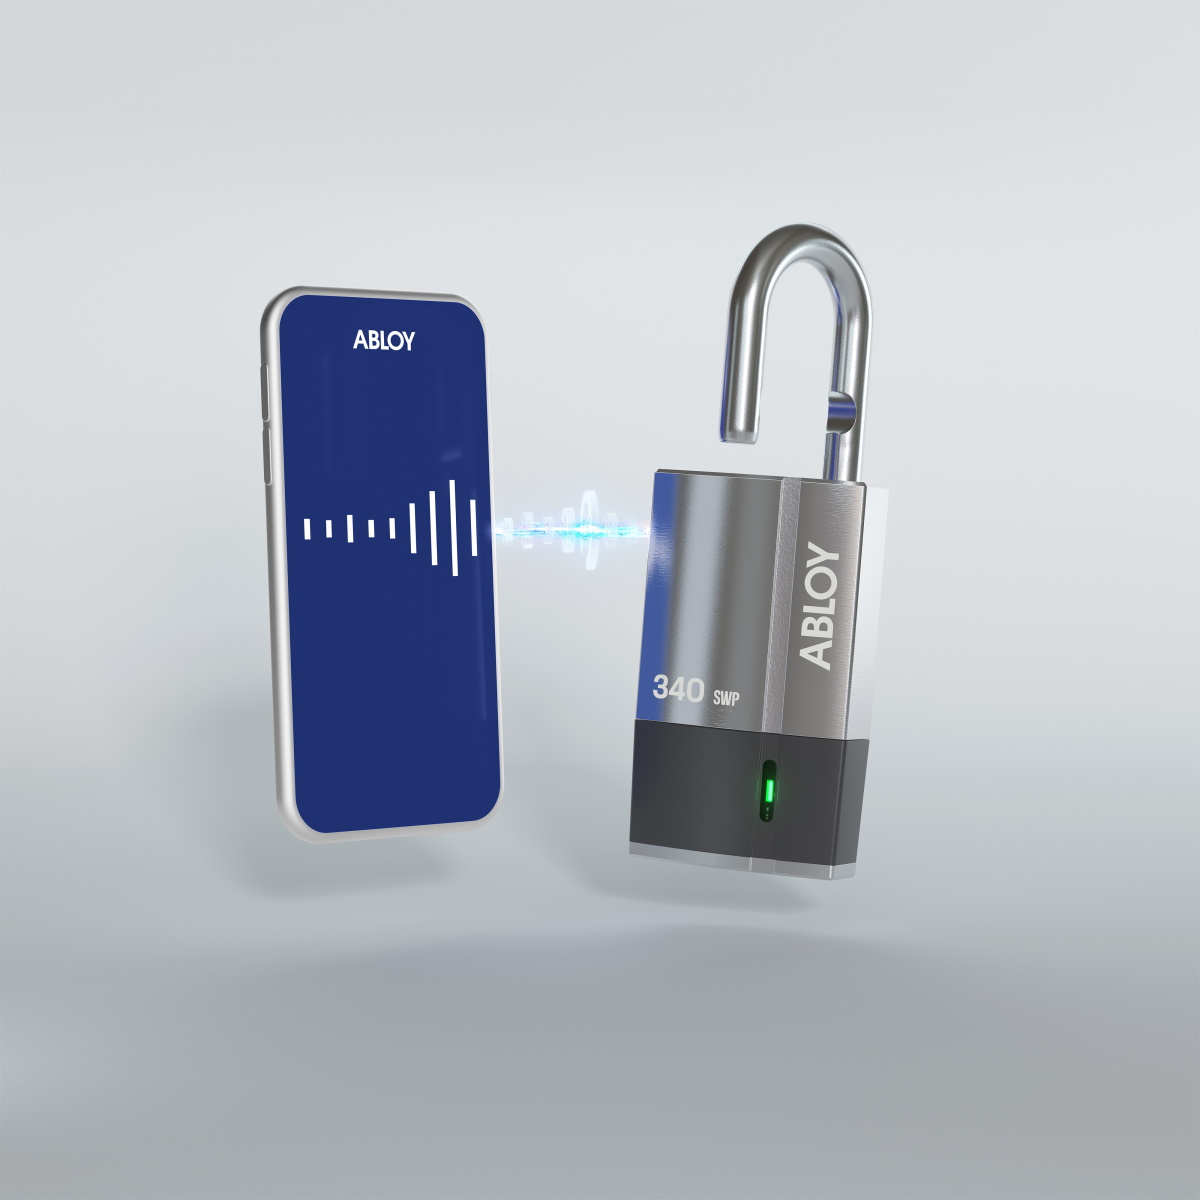 Abloy BEAT Keyless Solution From: ABLOY | Security Info Watch